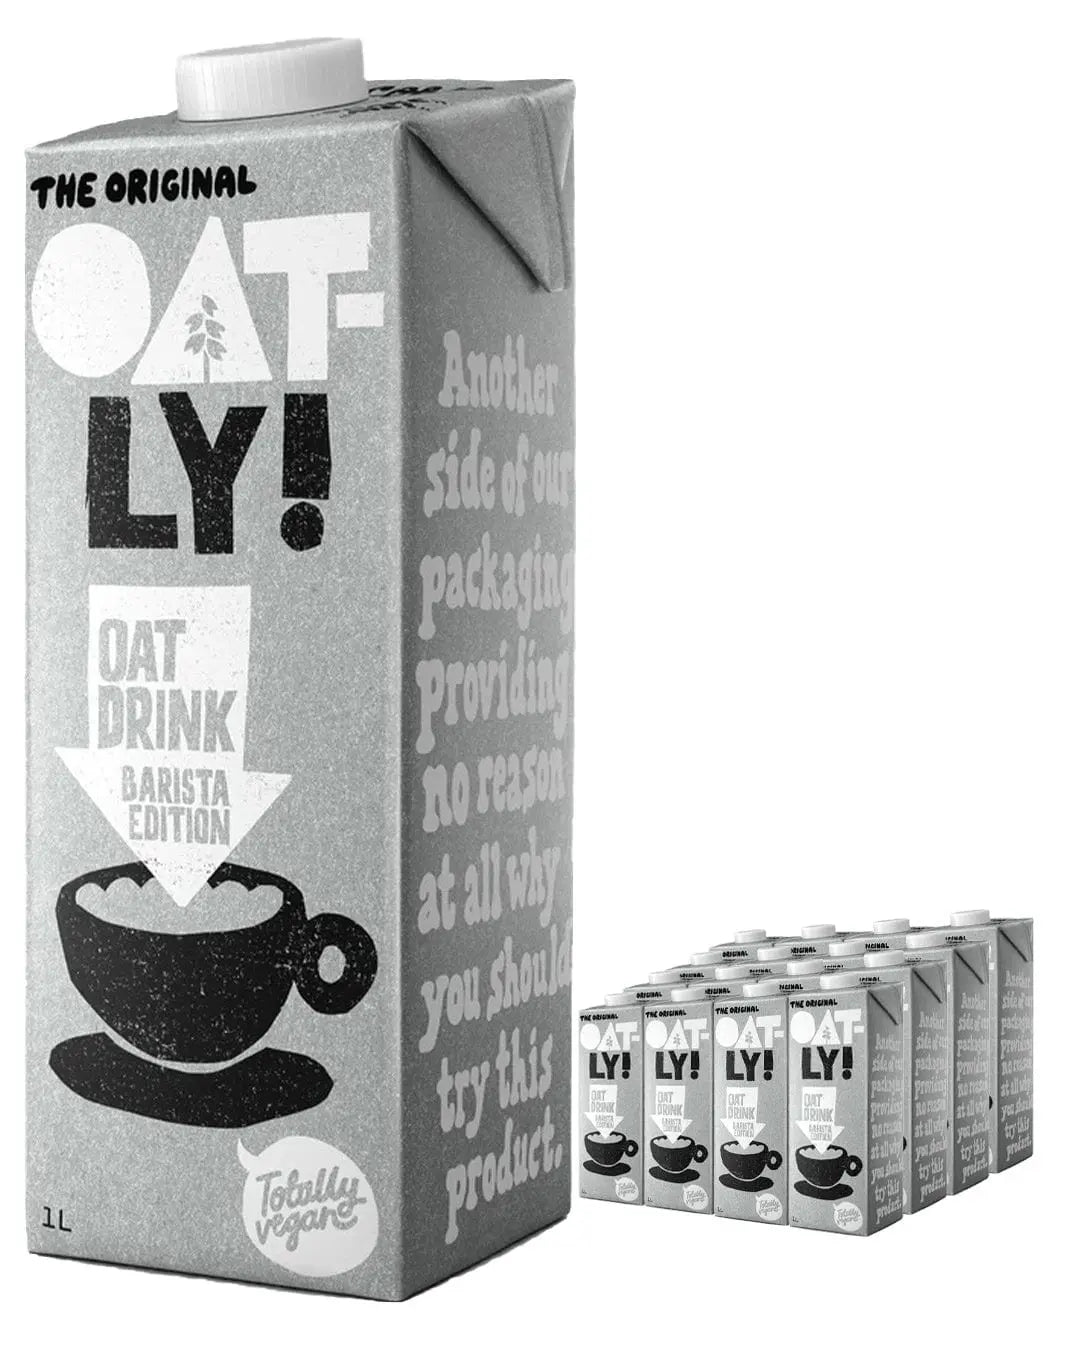 Oatly Oat Drink Barista Edition Multipack, 12 x 1 L Soft Drinks & Mixers